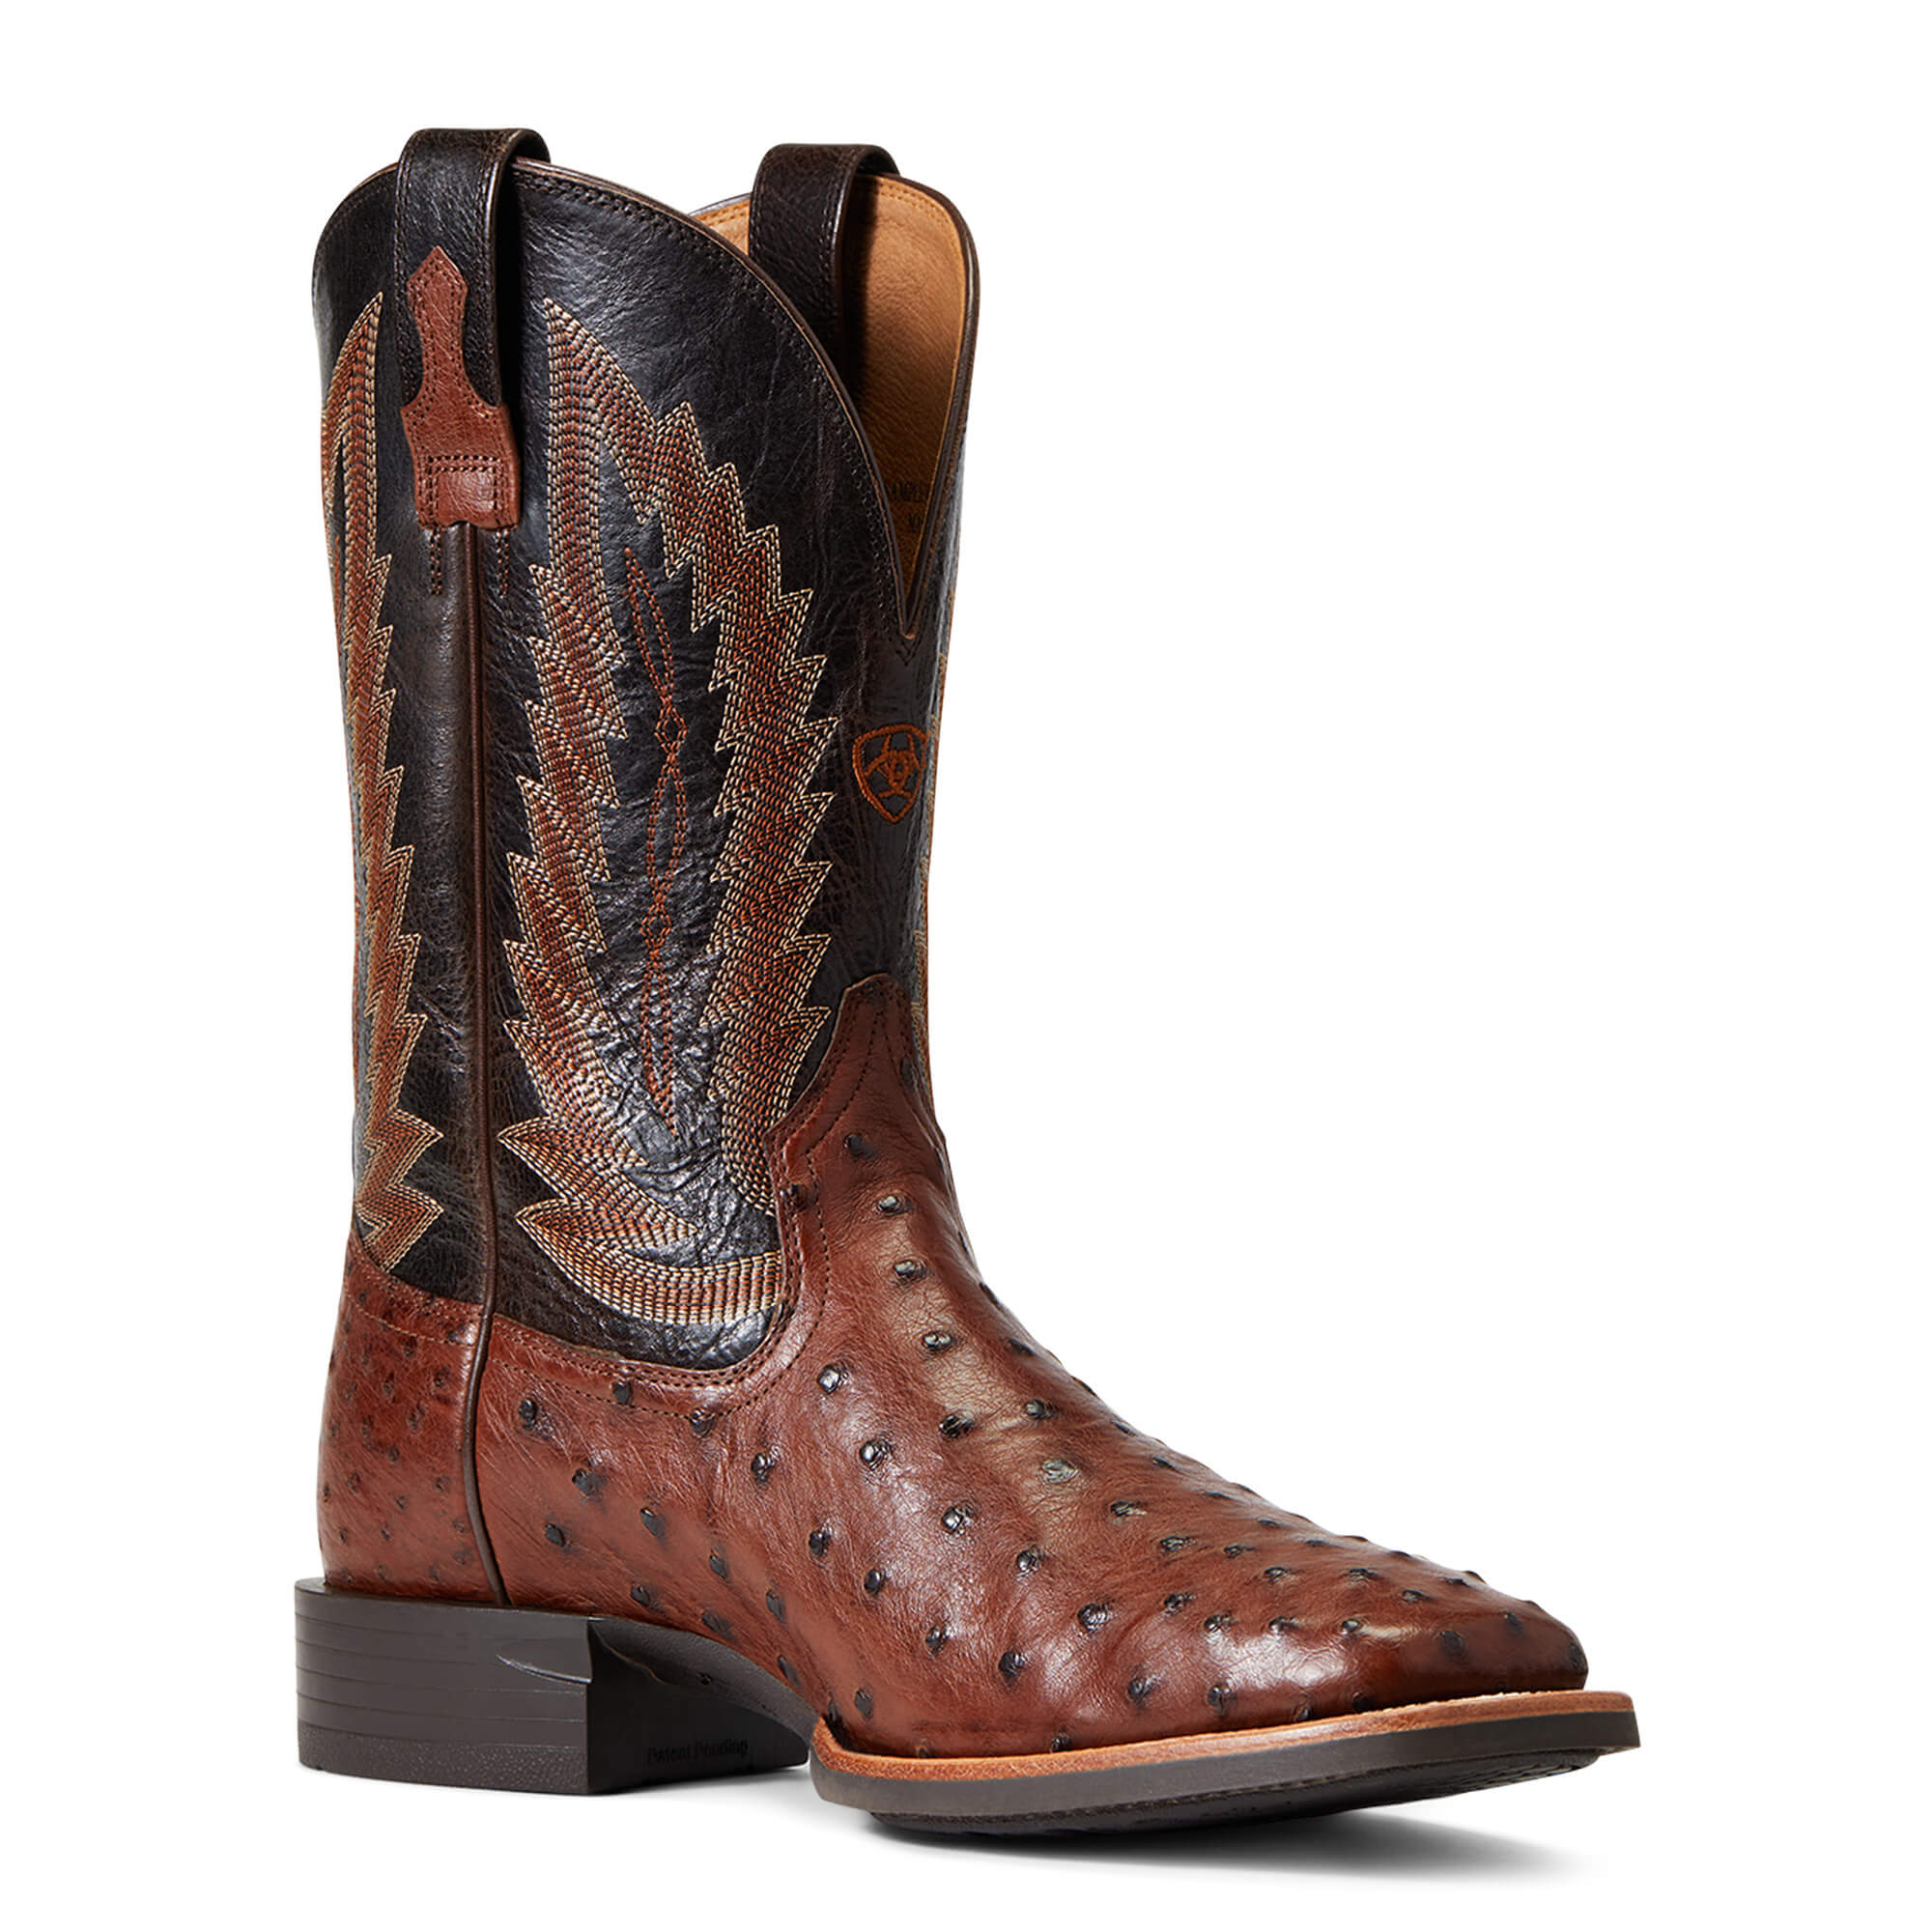 Ariat Men's Gallup Ostrich Western Boots Broad Square Toe